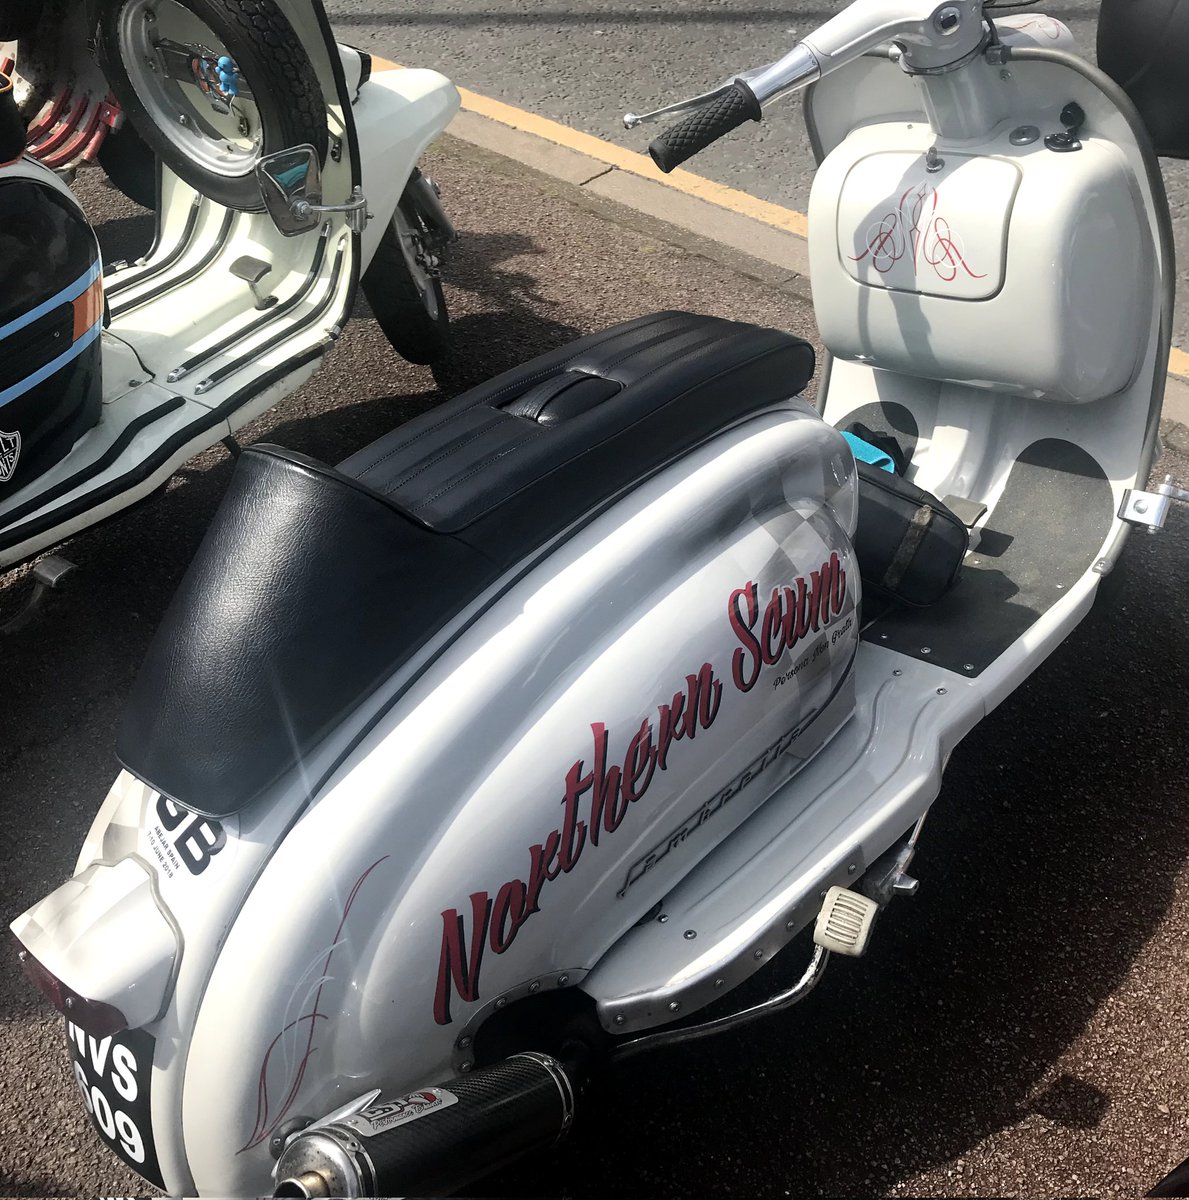 #beautifulscooter #northernsoul #skegness